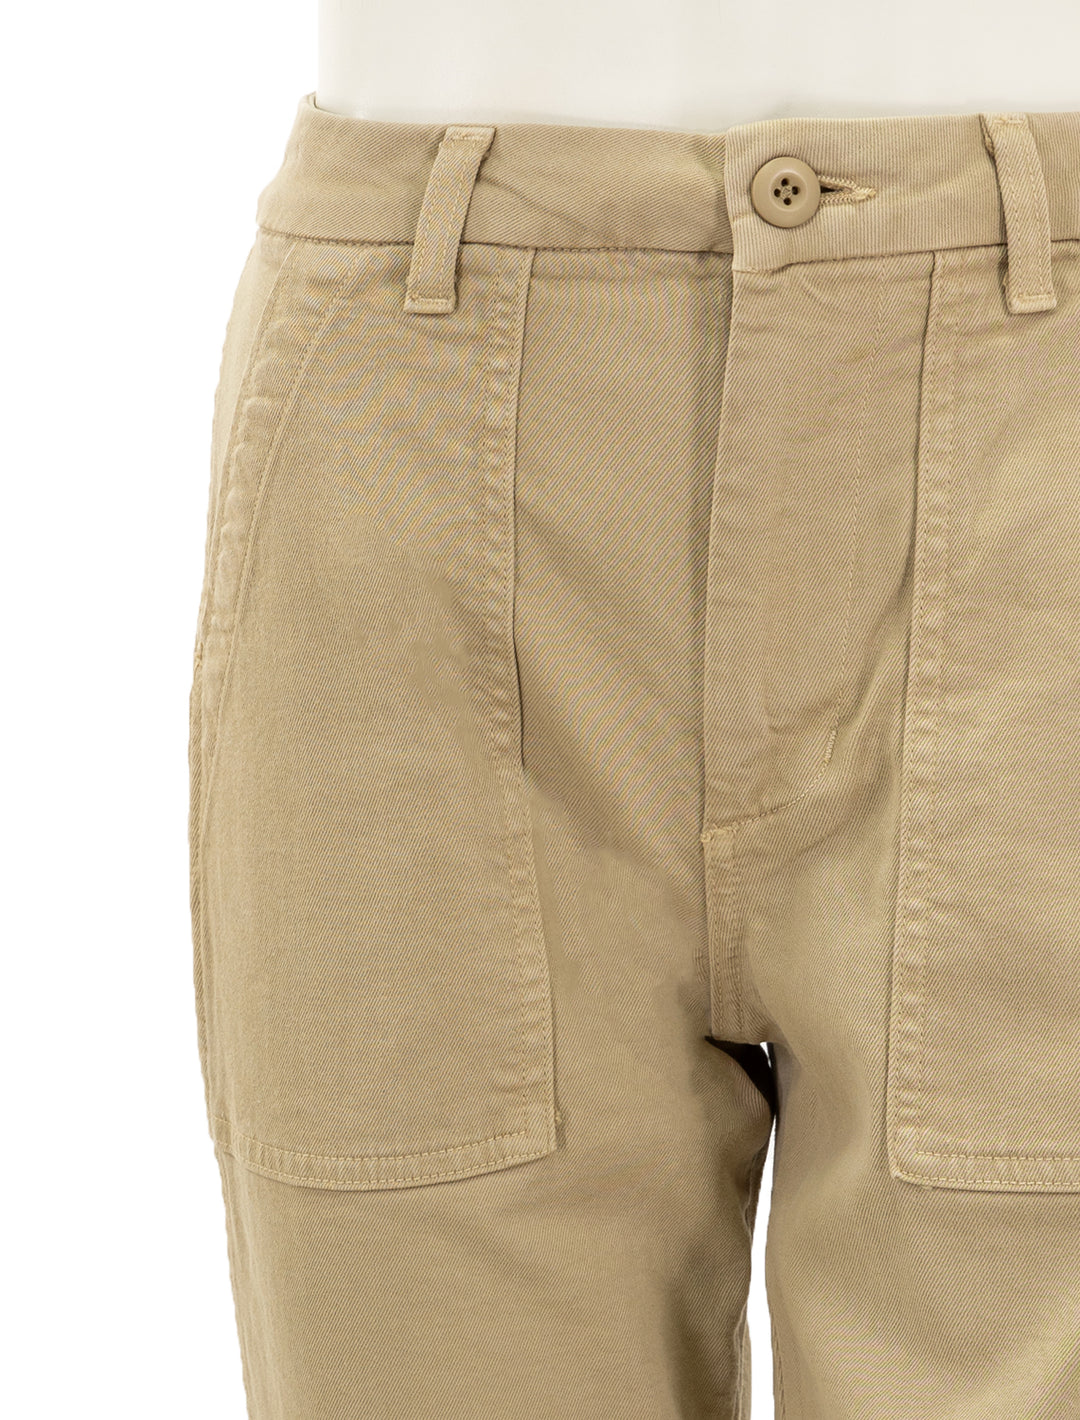 Close-up view of AMO's easy army trouser parchment.